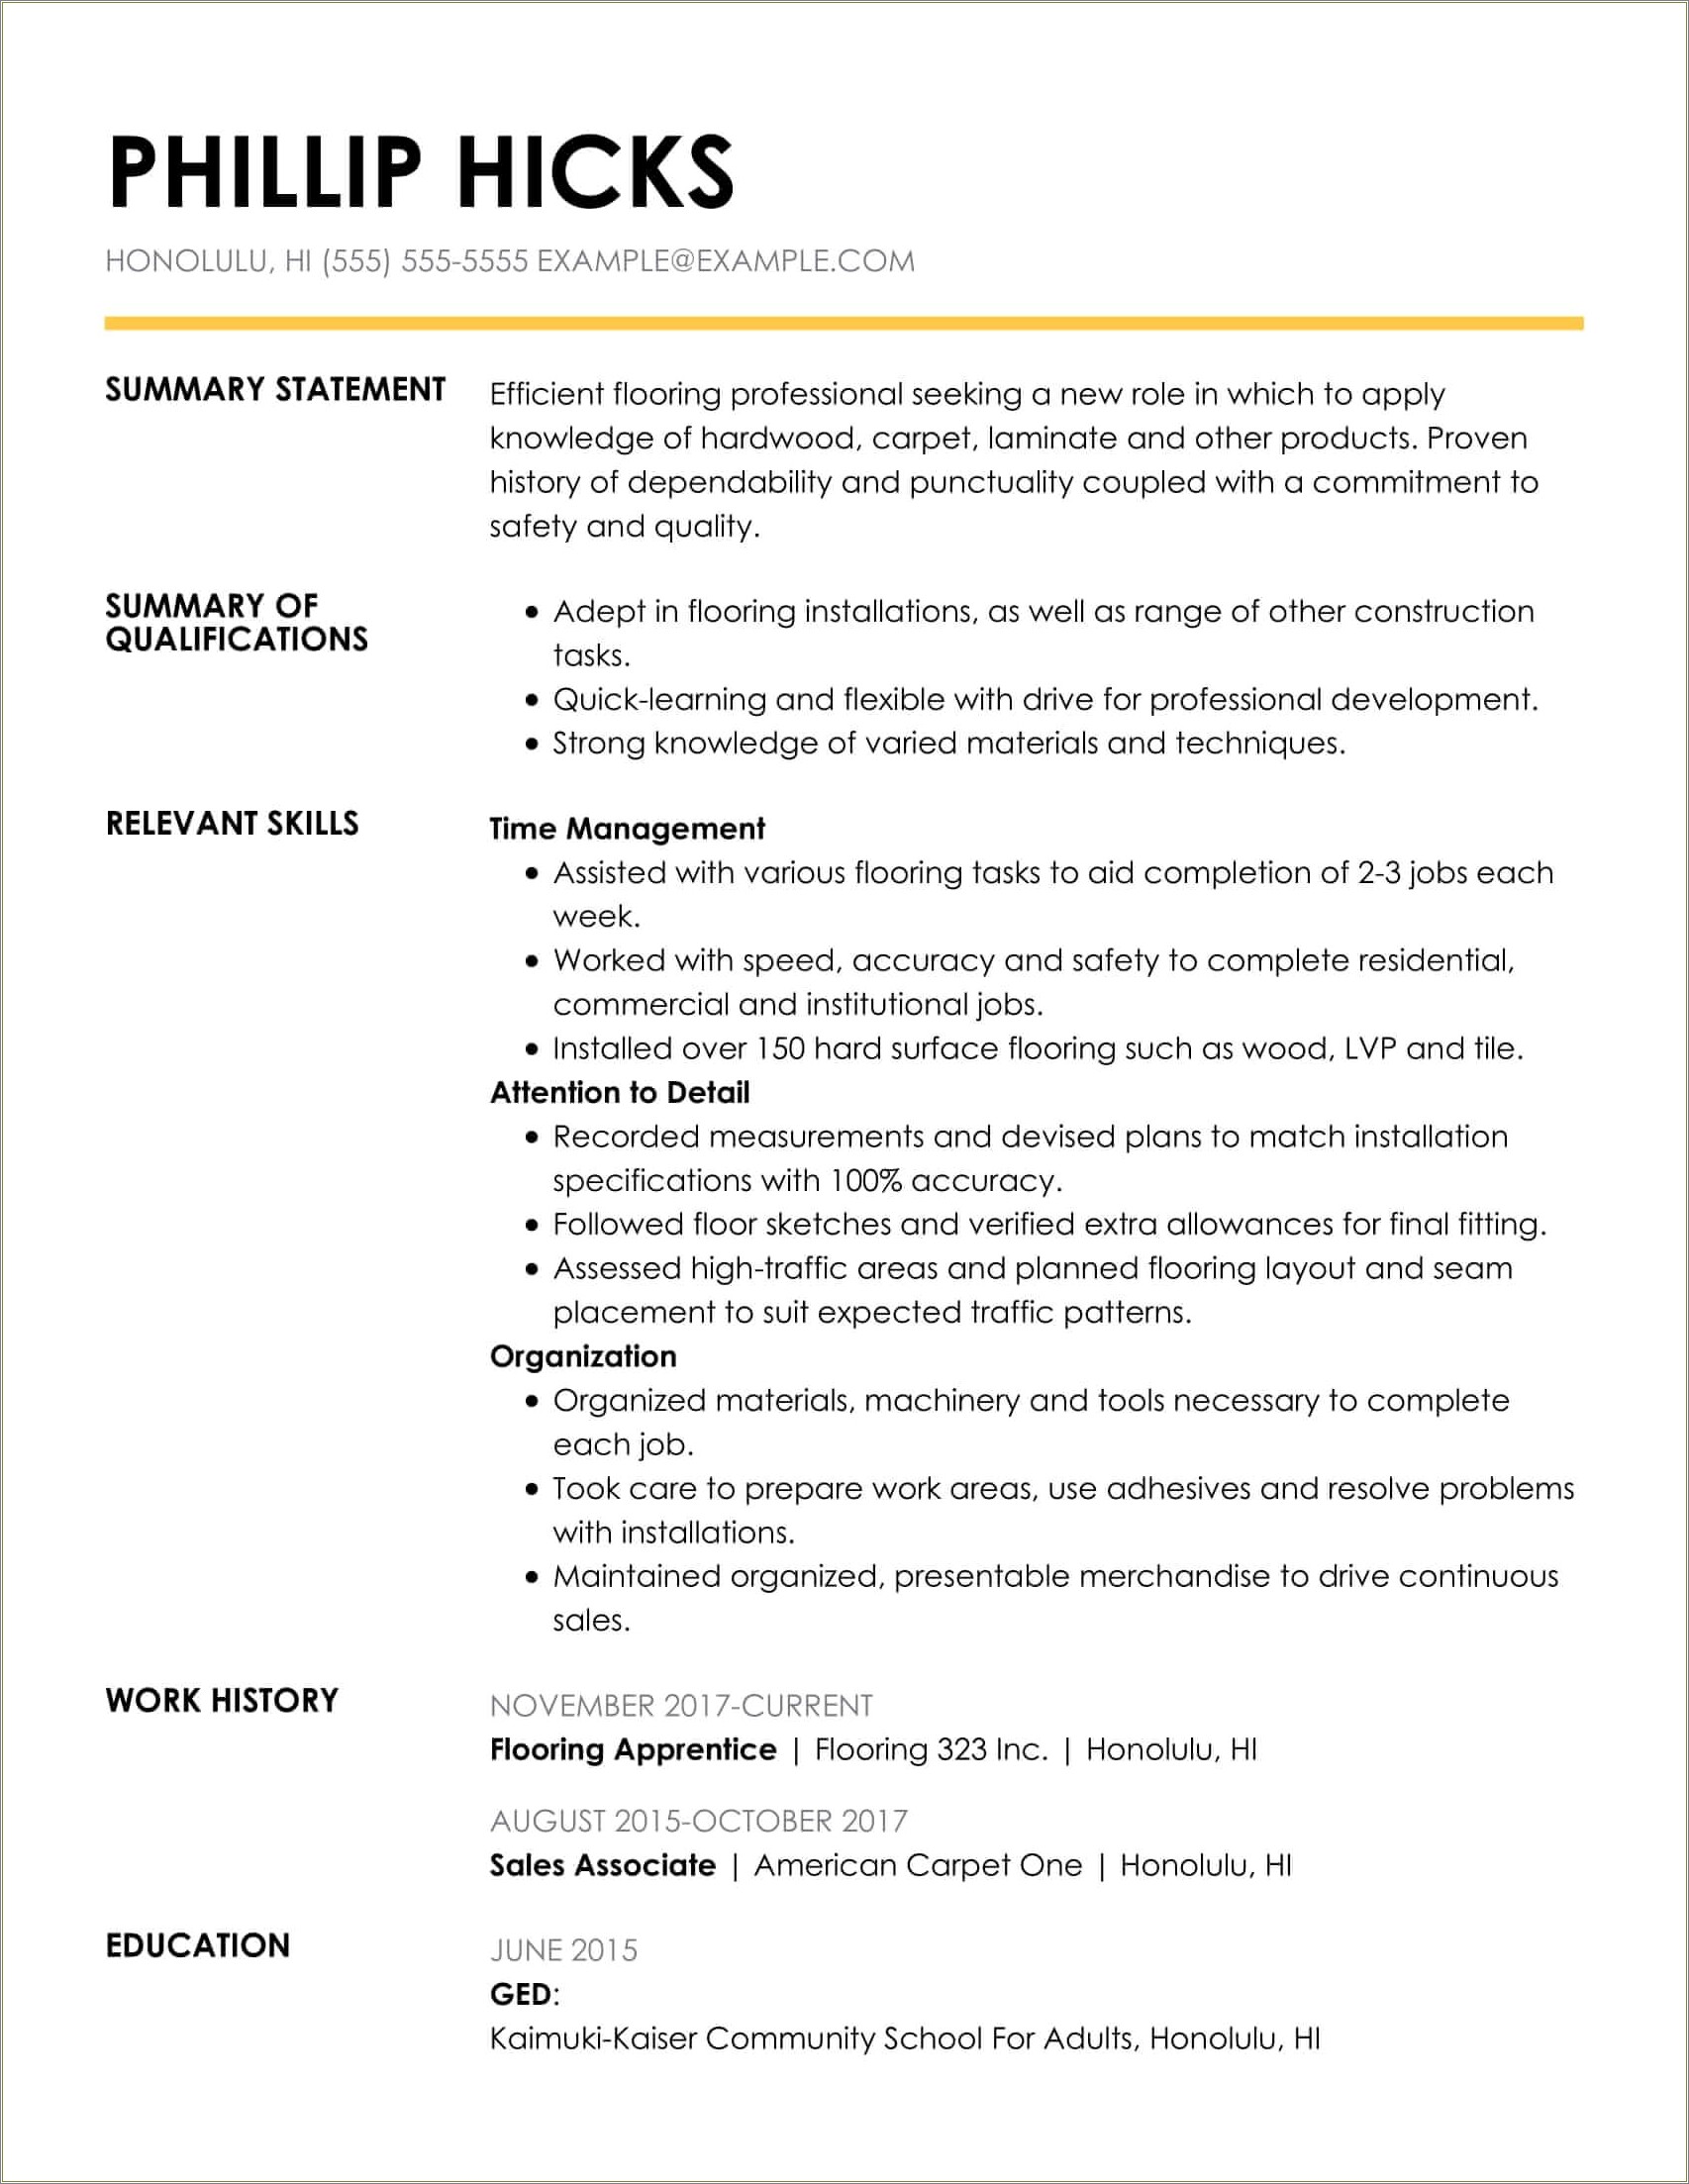 Resume Summary About Yourself Examples